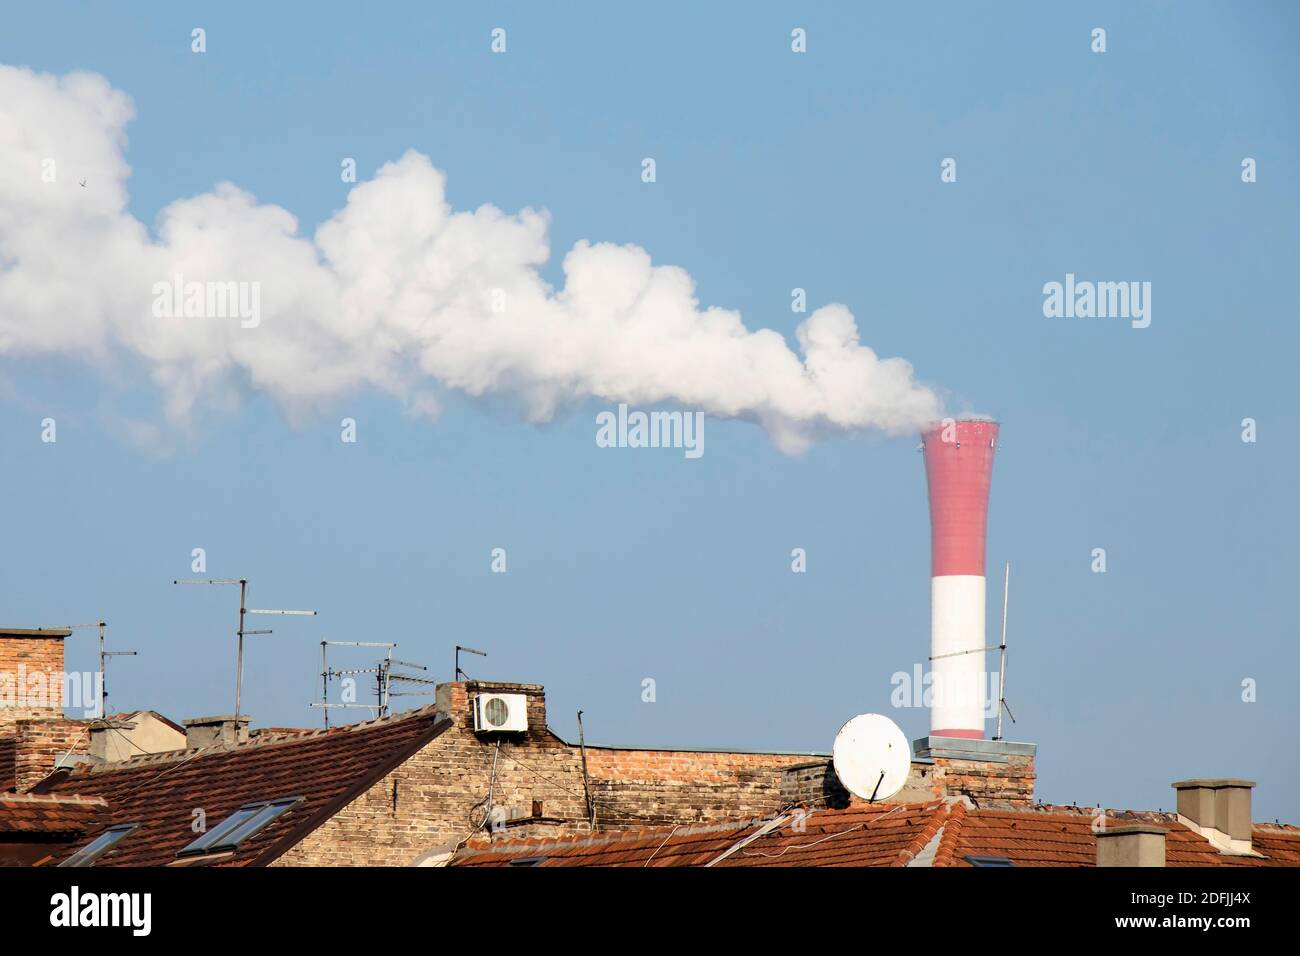 Belgrade, Serbia - December 1, 2020: Heating and power station chimney smokestack in red and white stripes, with smoke, in an old residential part of Stock Photo